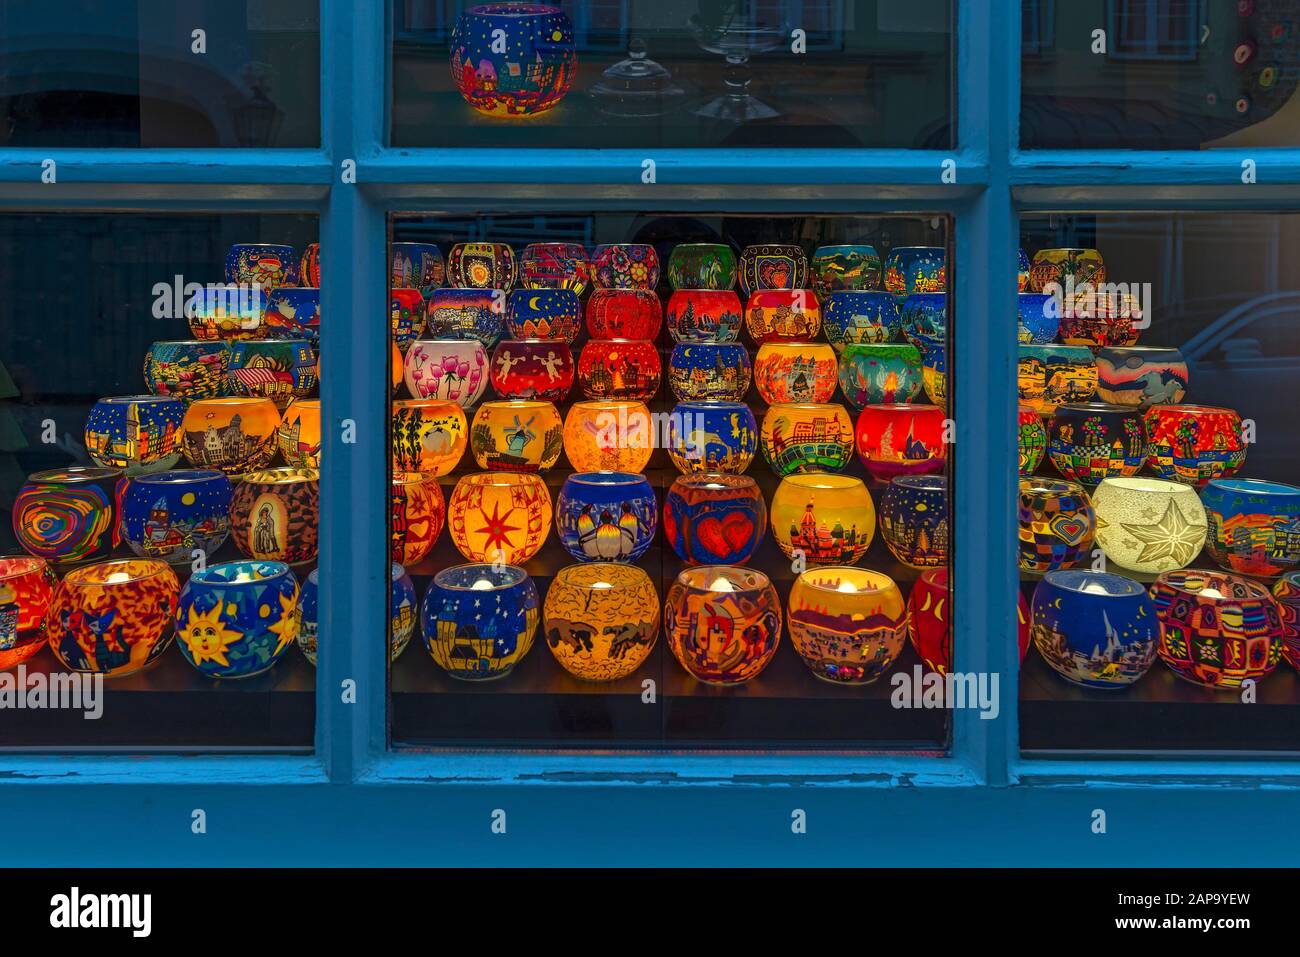 Colourful painted illuminated lanterns with Christmas motifs in a shop window, Lower Saxony, Germany Stock Photo